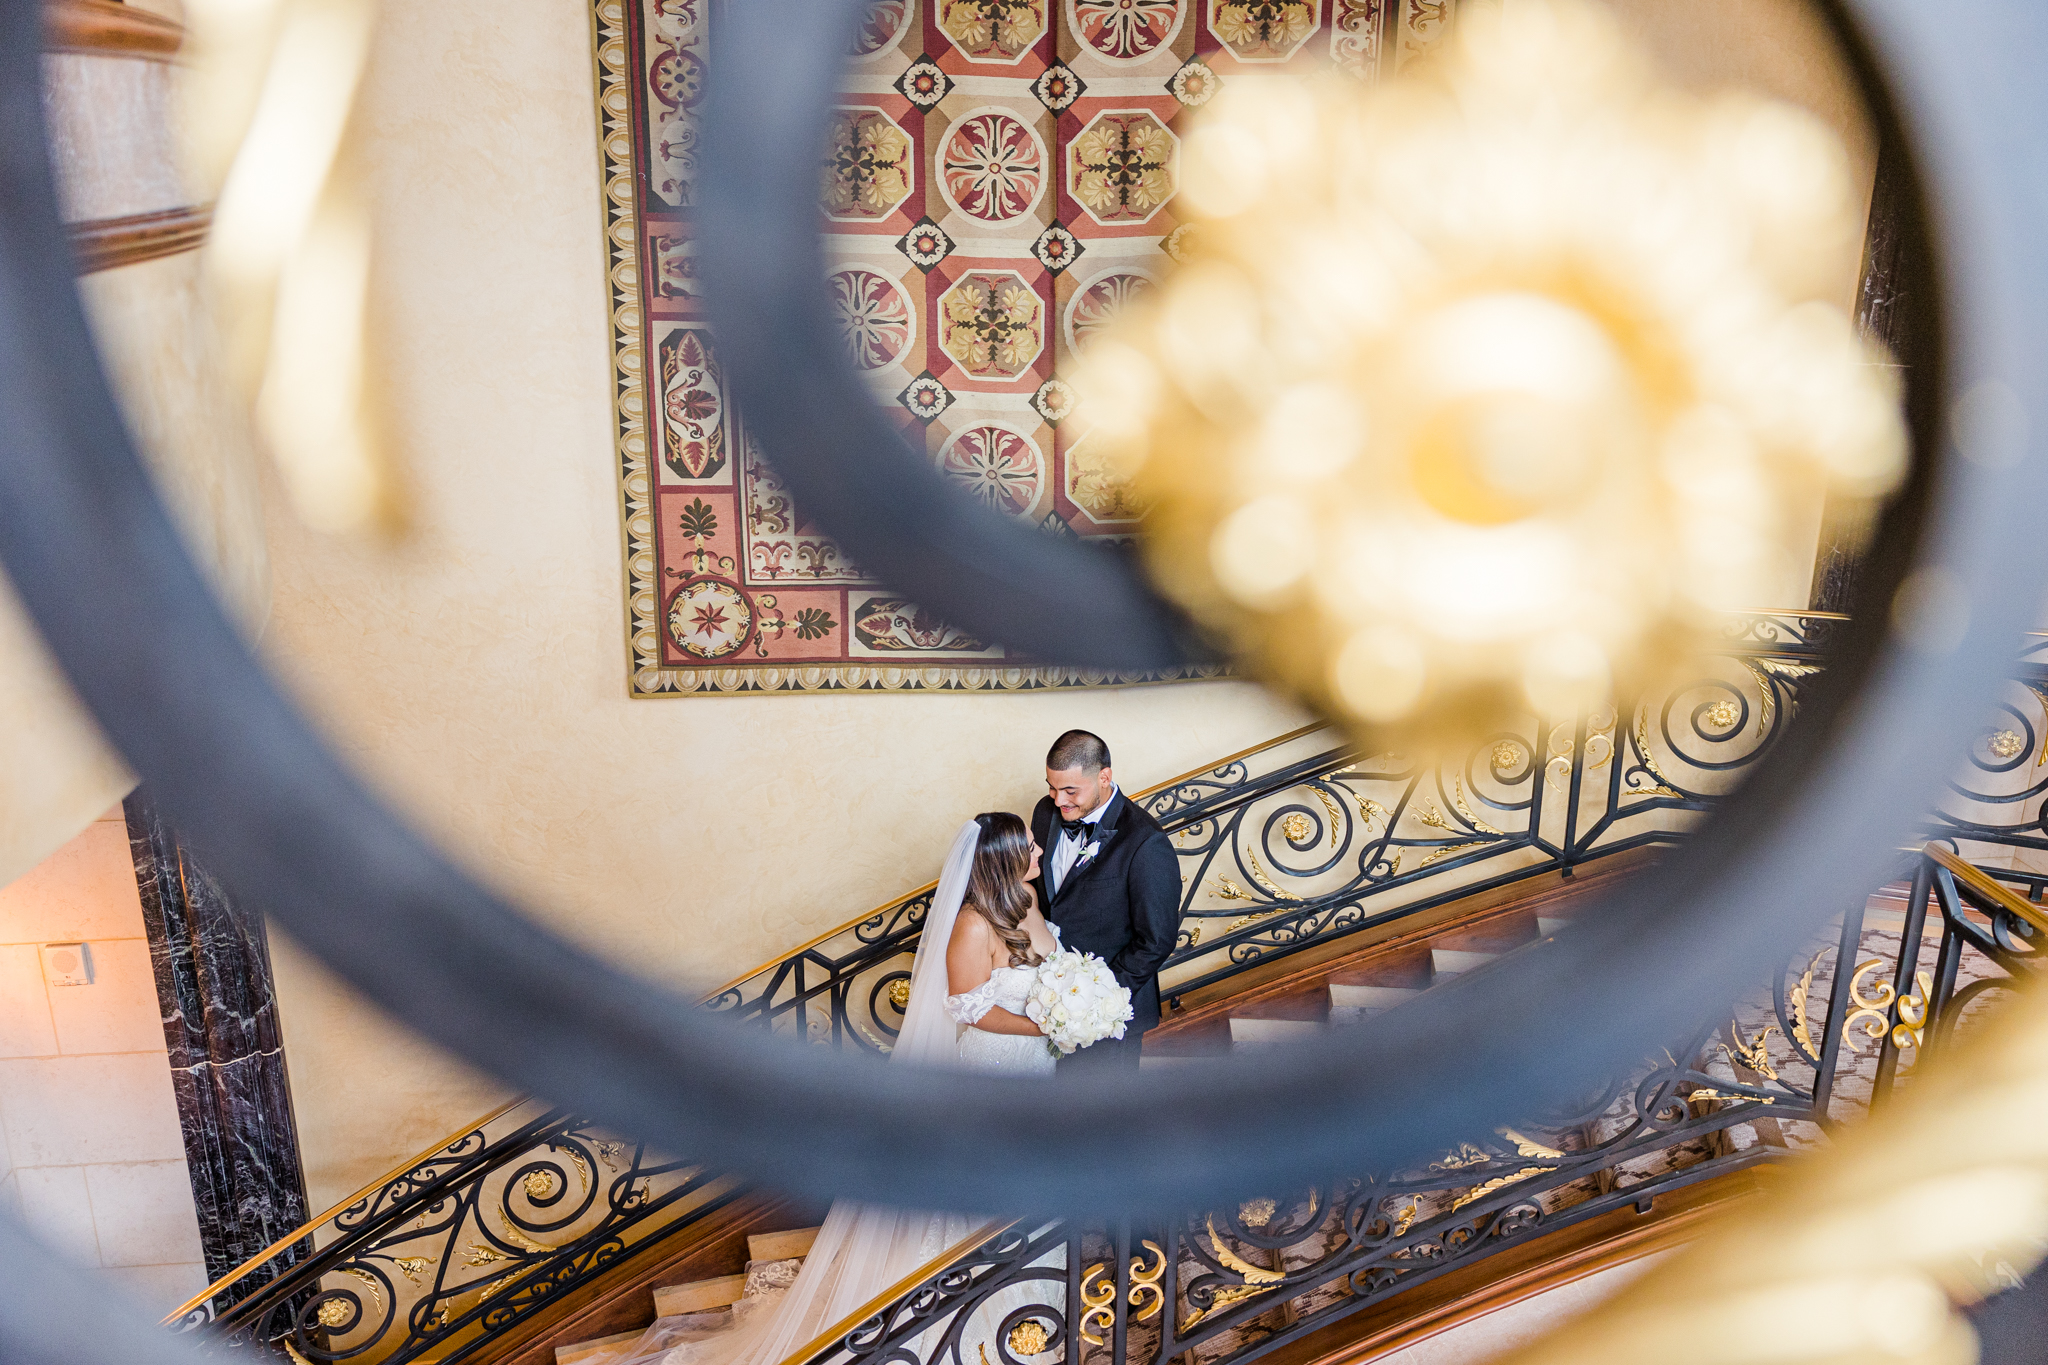 Bride and groom on their wedding day captured by Carlsbad Photo at Fairmont Grand Del Mar